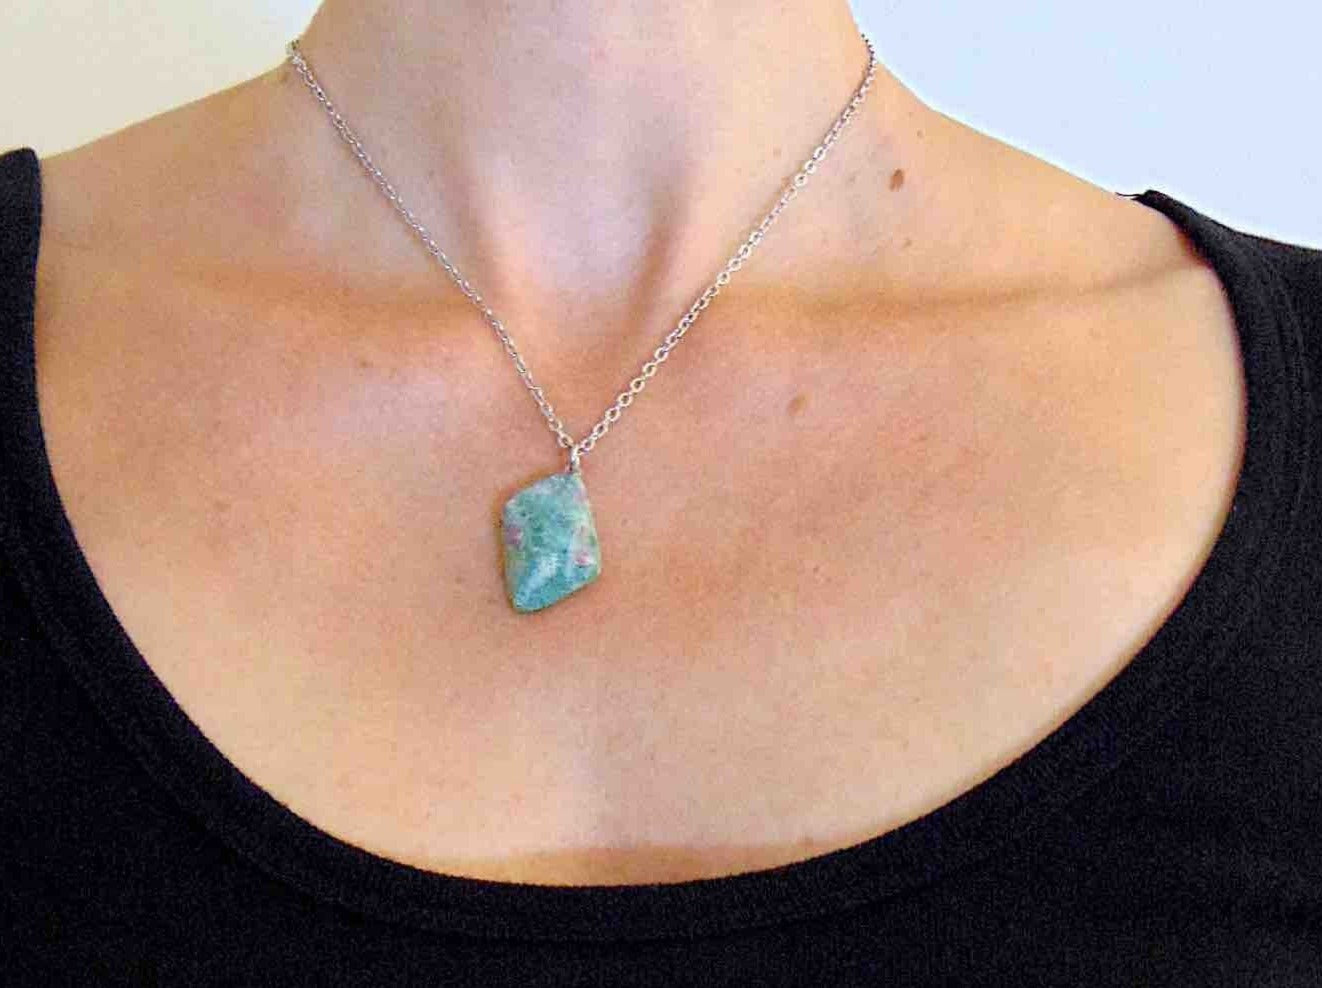 16-inch necklace with marbled emerald green fuchsite ruby stone lozenge pendant, purple inclusions, stainless steel chain